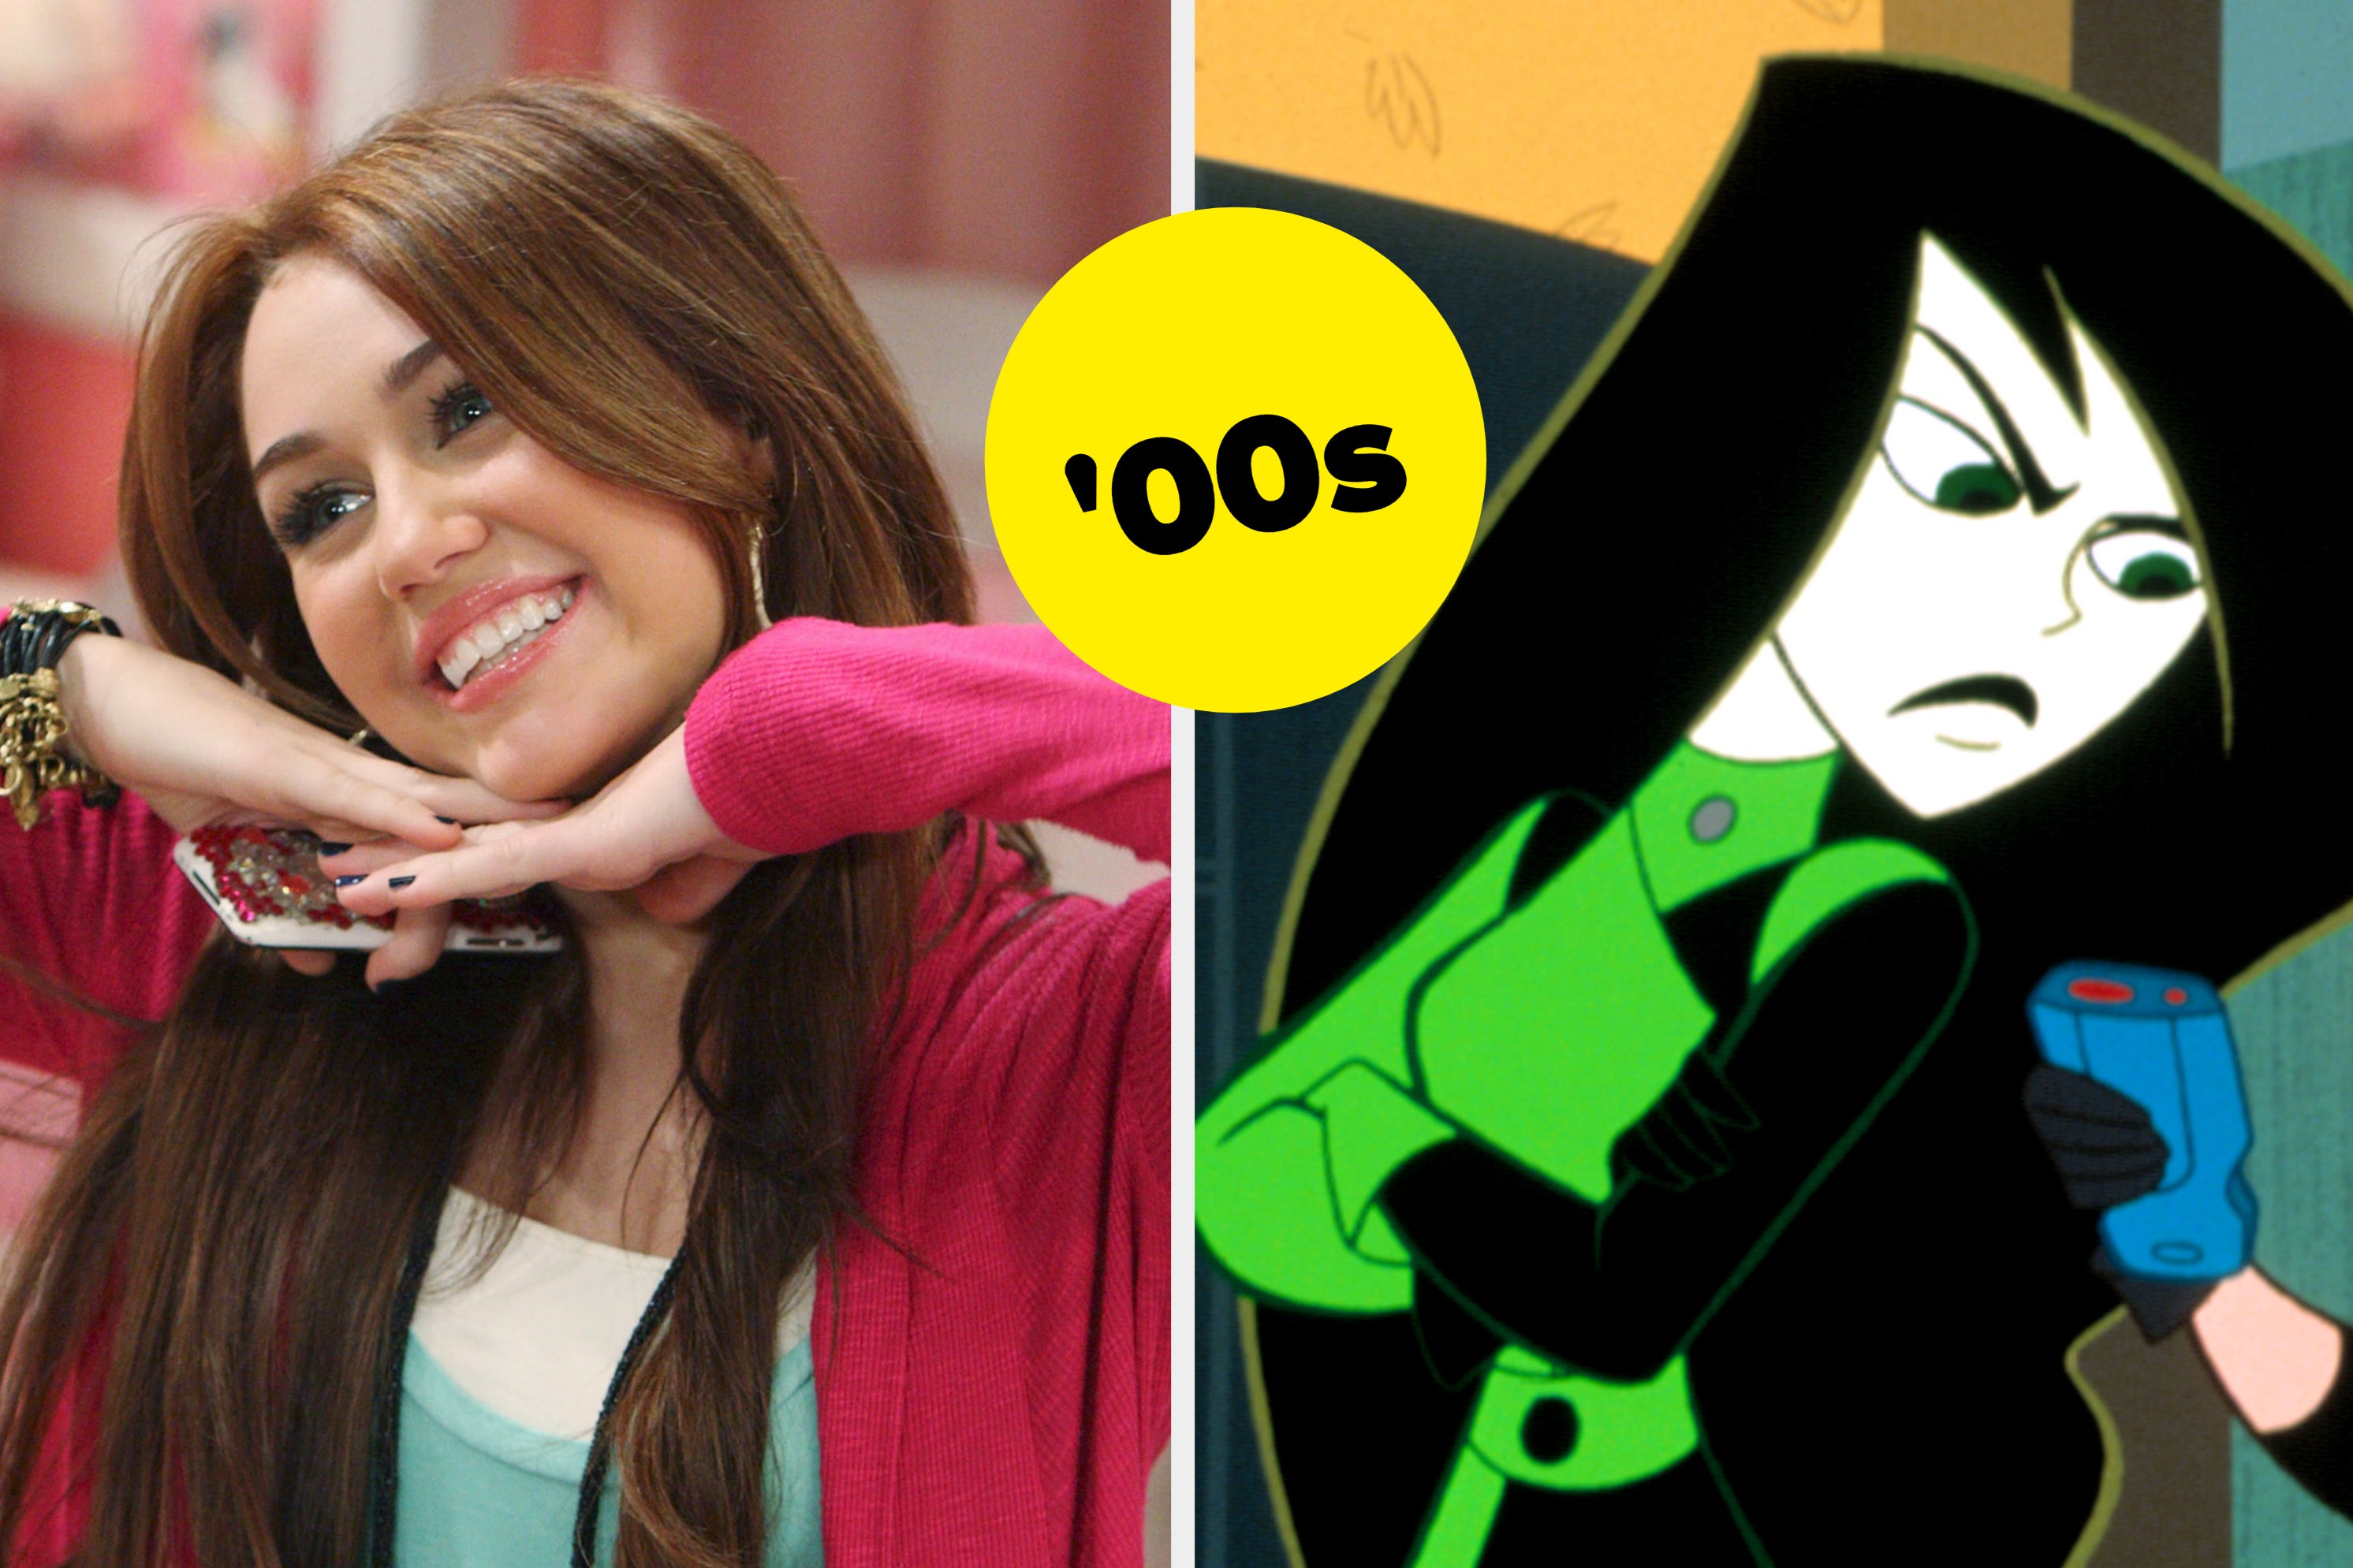 Tell Us About Yourself And We'll Tell You Which 2000s Show You Belong
In